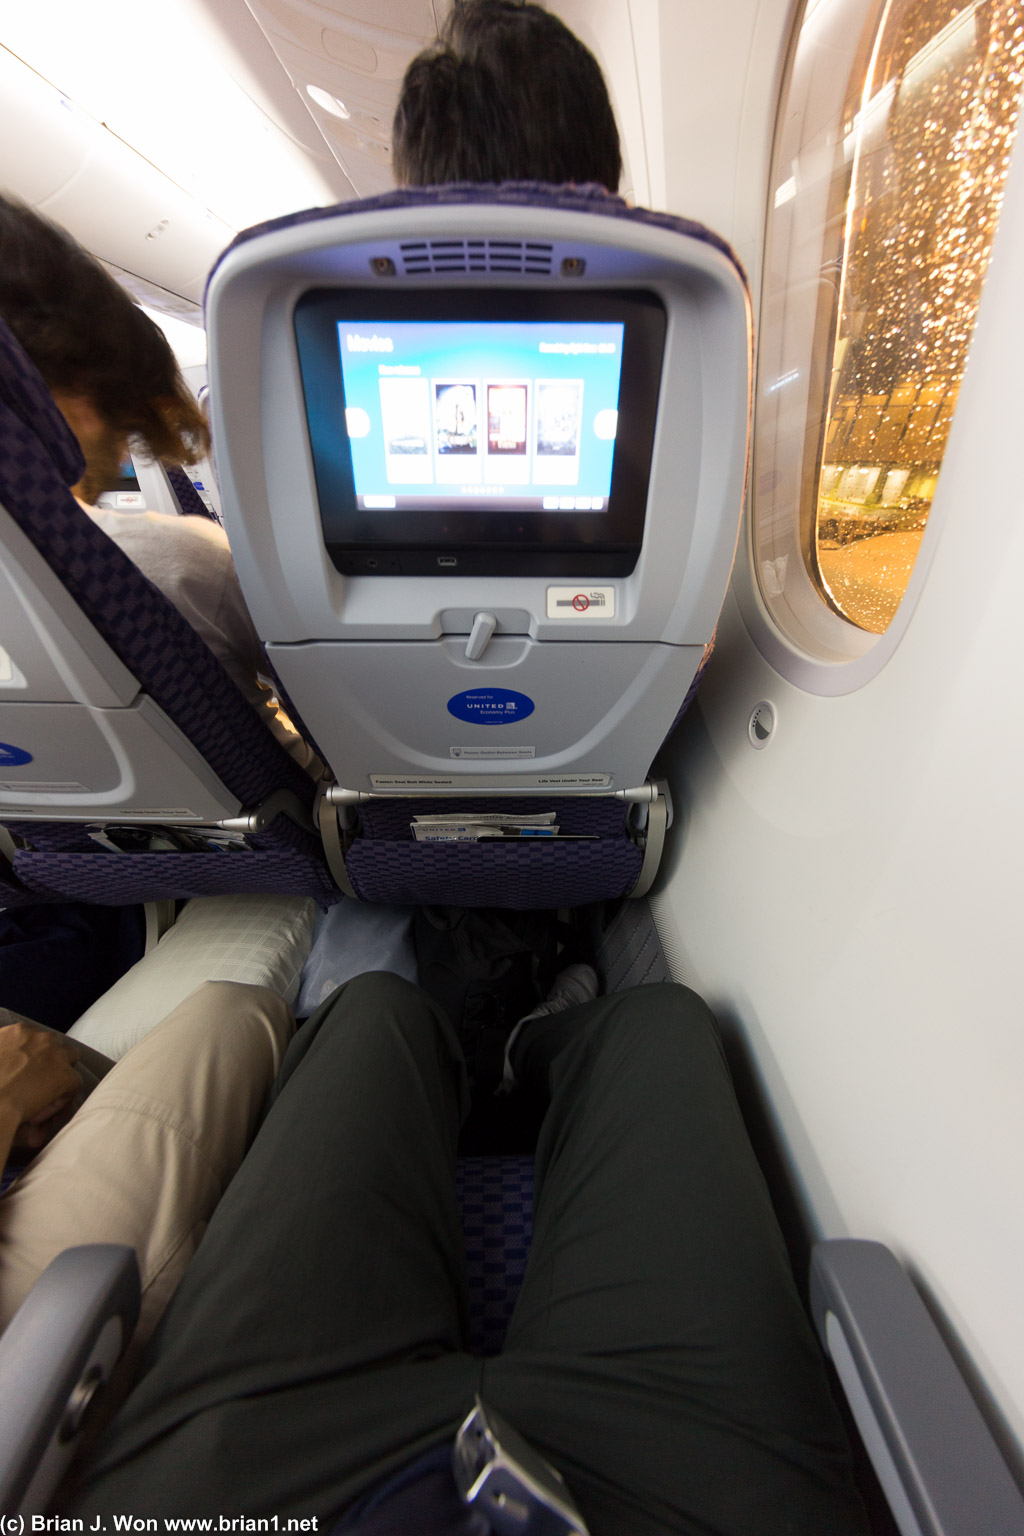 Economy plus legroom is okay, 17.3" wide seats with a row full of not-small-guys is not so great.